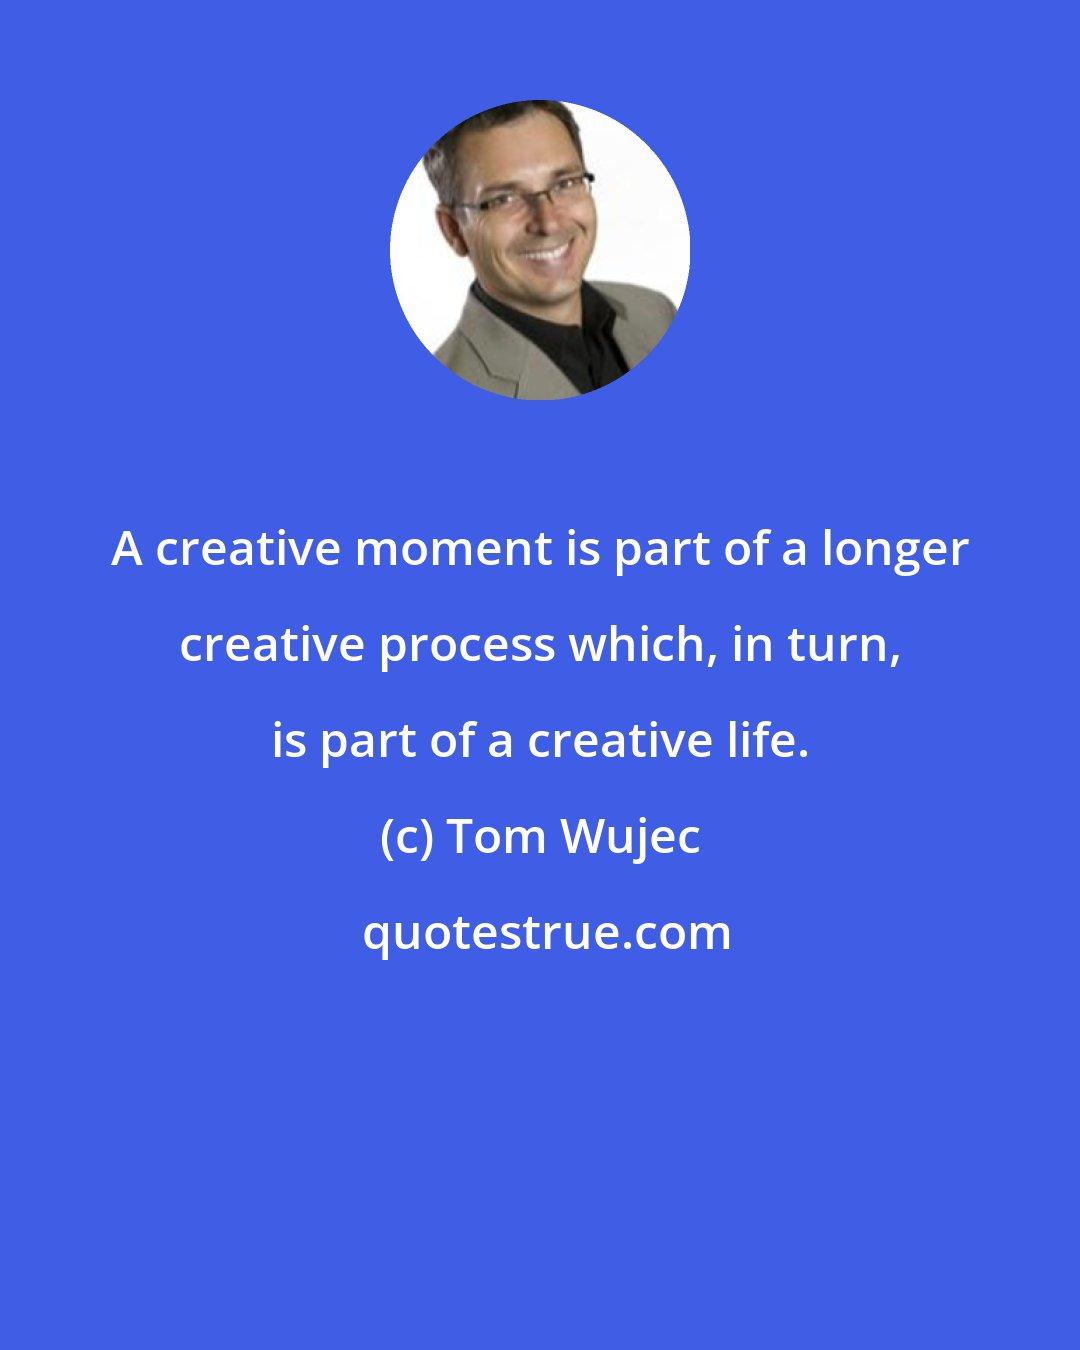 Tom Wujec: A creative moment is part of a longer creative process which, in turn, is part of a creative life.